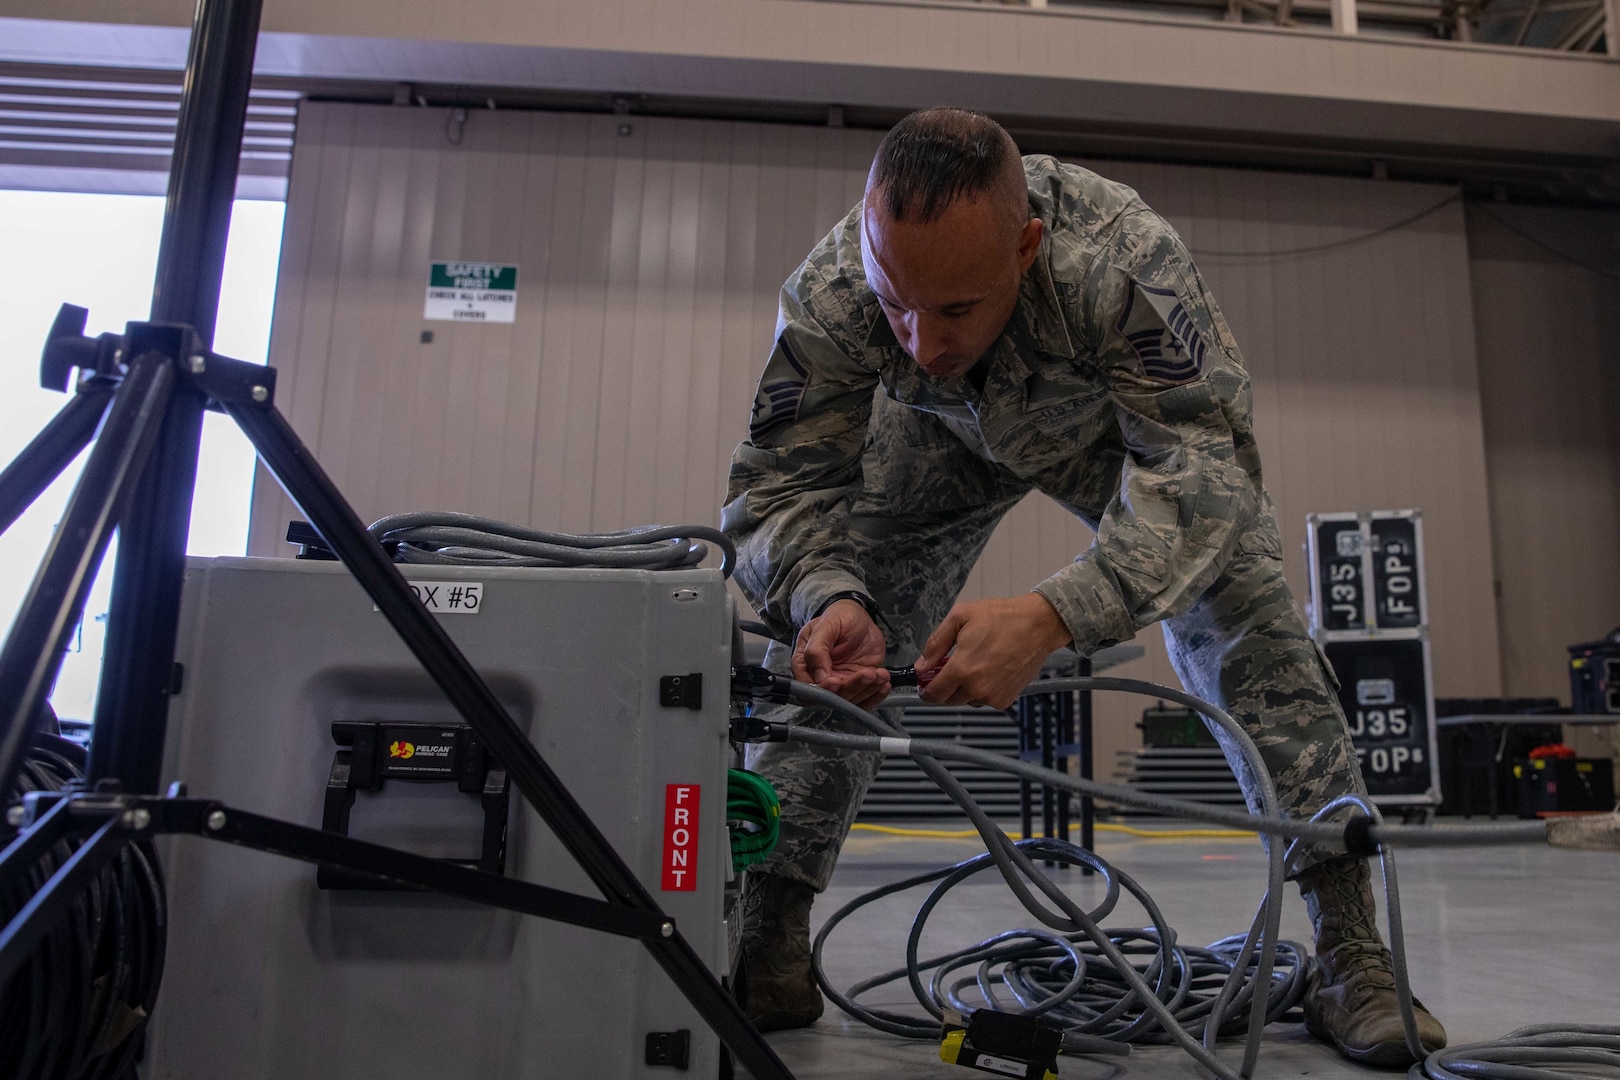 U.S. Air Force Master Sgt. Seneca Linder, a member of Joint Task Force Civil Support’s (JTF-CS) communications directorate, sets up a network distribution box during a main command post exercise at Felker Army Airfield at Joint Base Langley-Eustis. The four-day exercise familiarized the command with established procedures on deploying the main command post, and tested and verified the command’s online collaborative tools and systems. (Official DoD photo by Mass Communication Specialist 3rd Class Michael Redd/RELEASED)